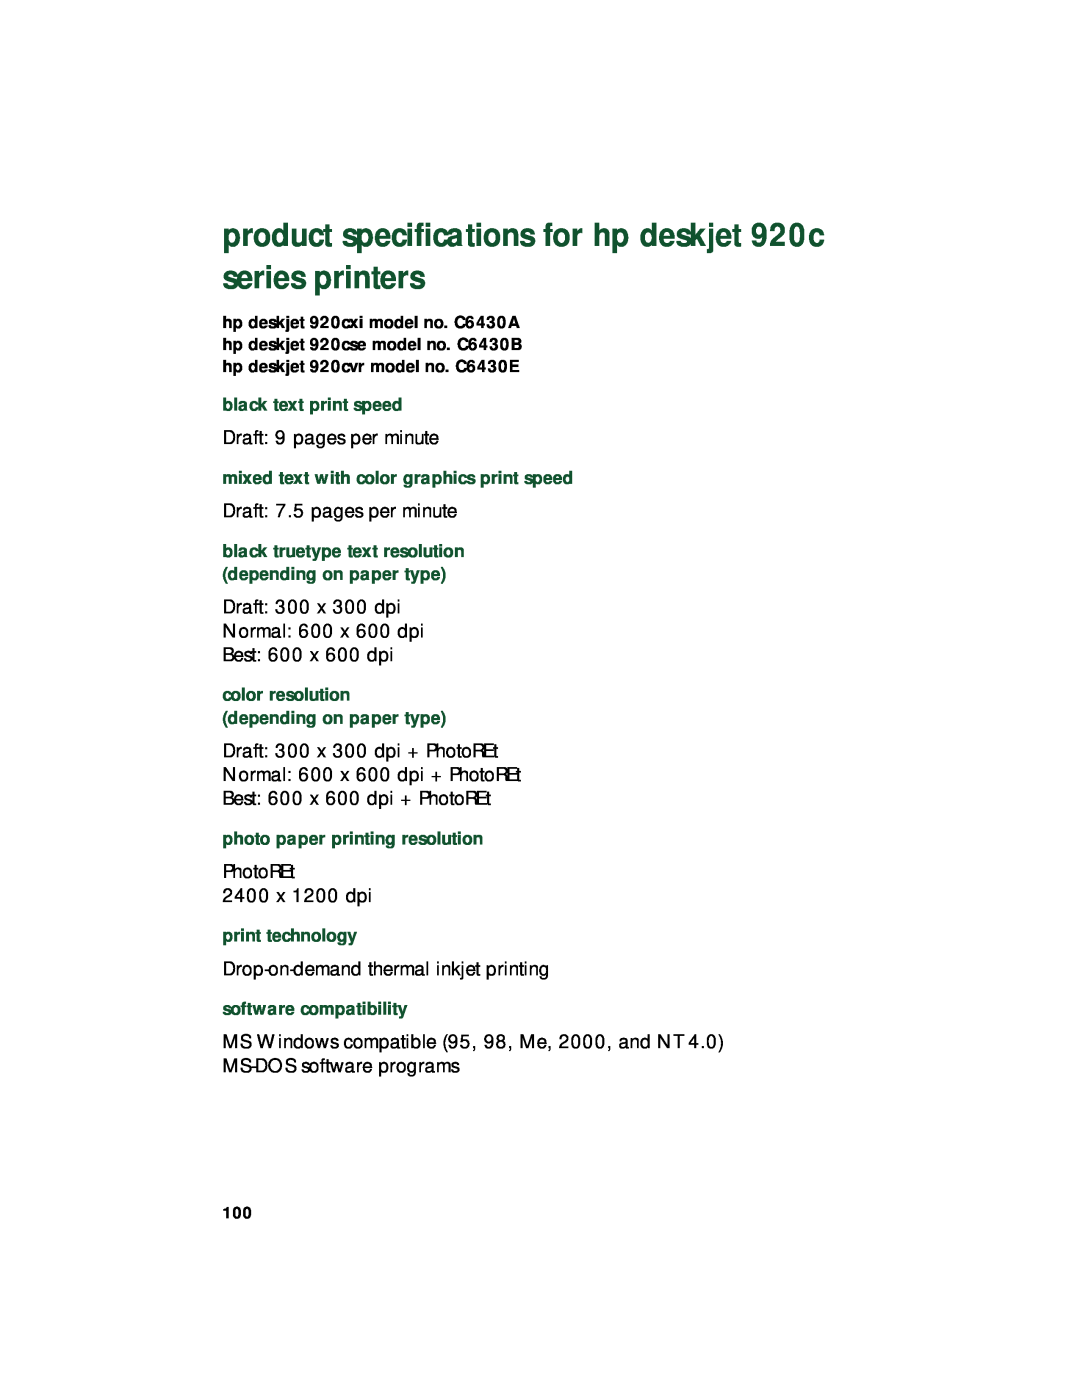 HP product specifications for hp deskjet 920c series printers, black text print speed, photo paper printing resolution 